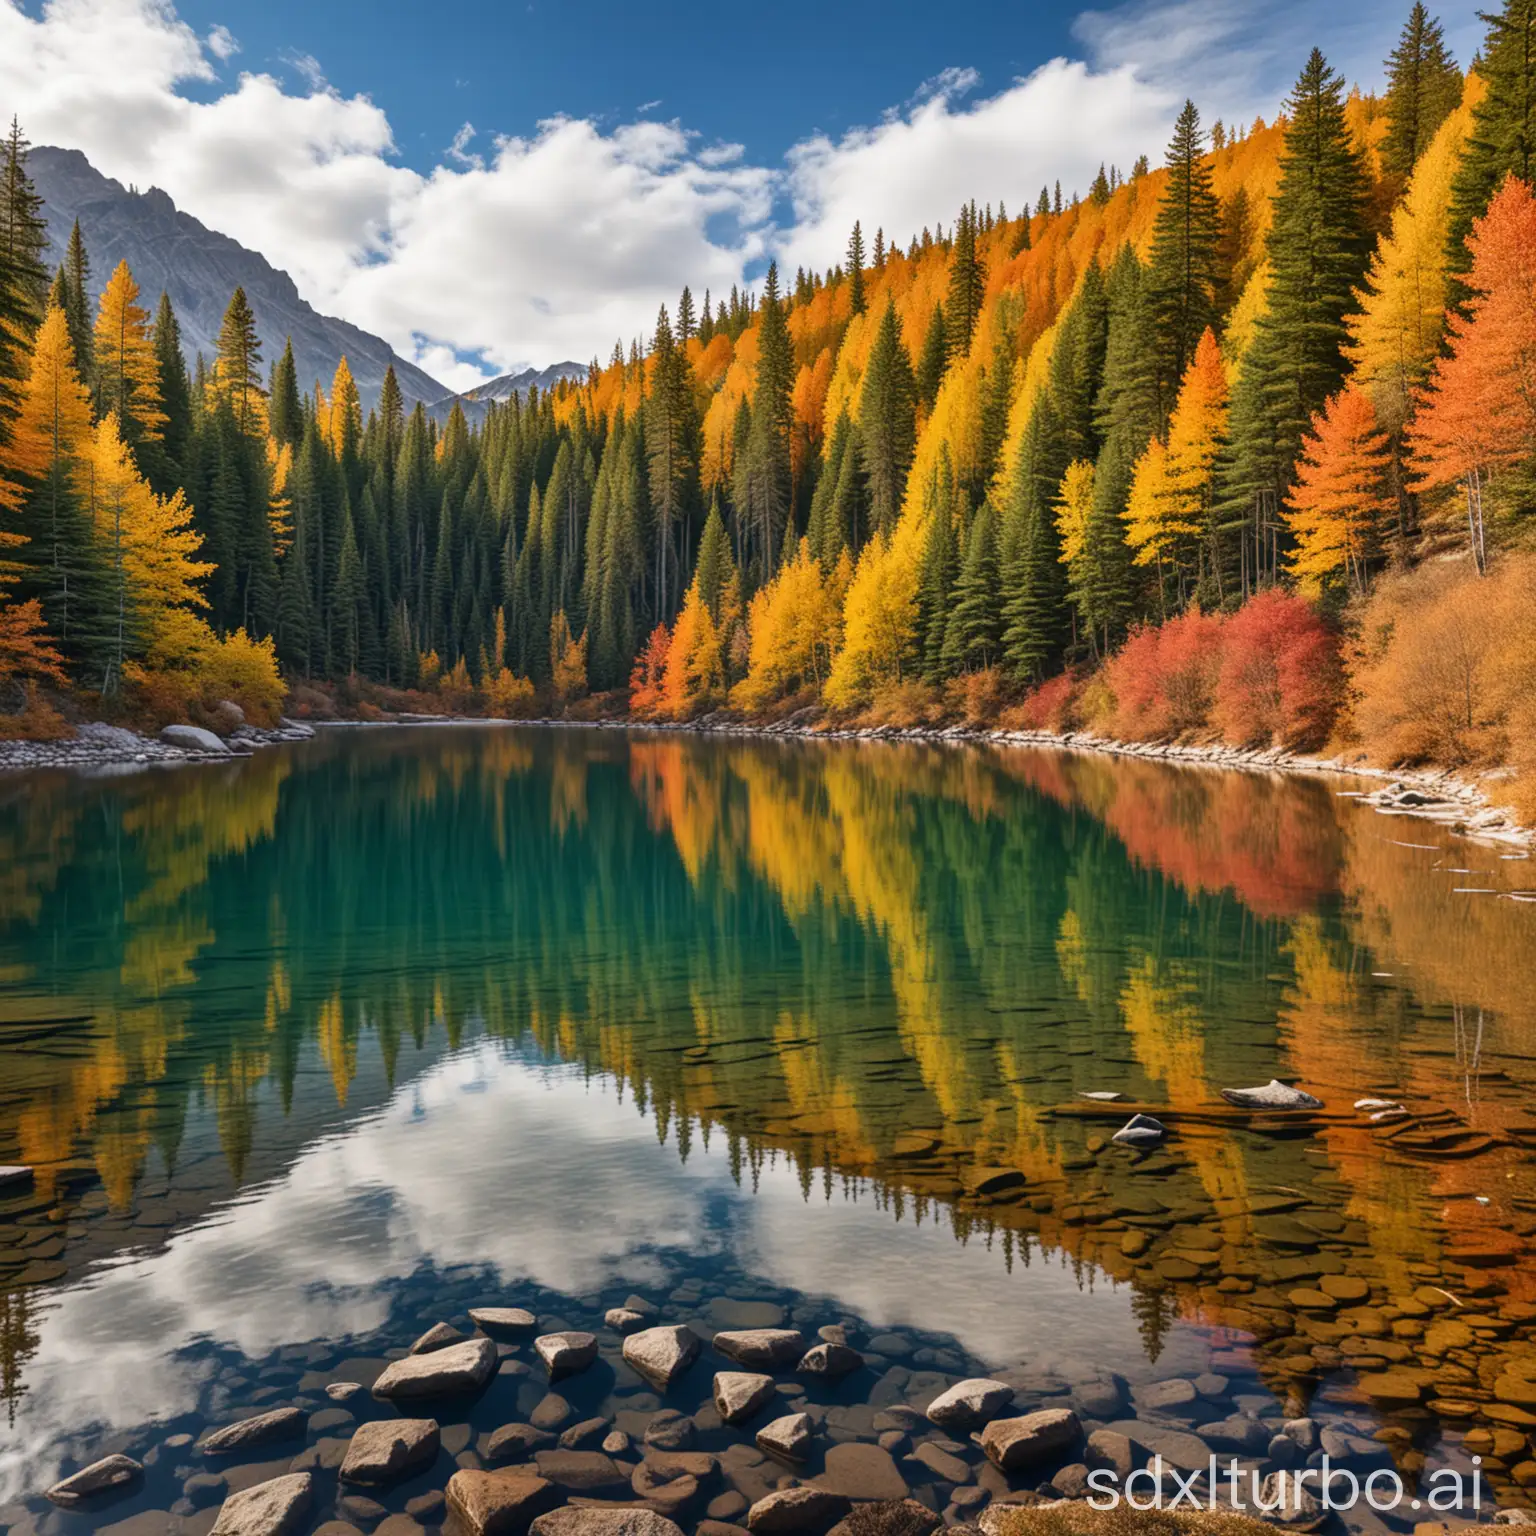 Serene landscape of a tranquil mountain lake surrounded by autumn foliage.